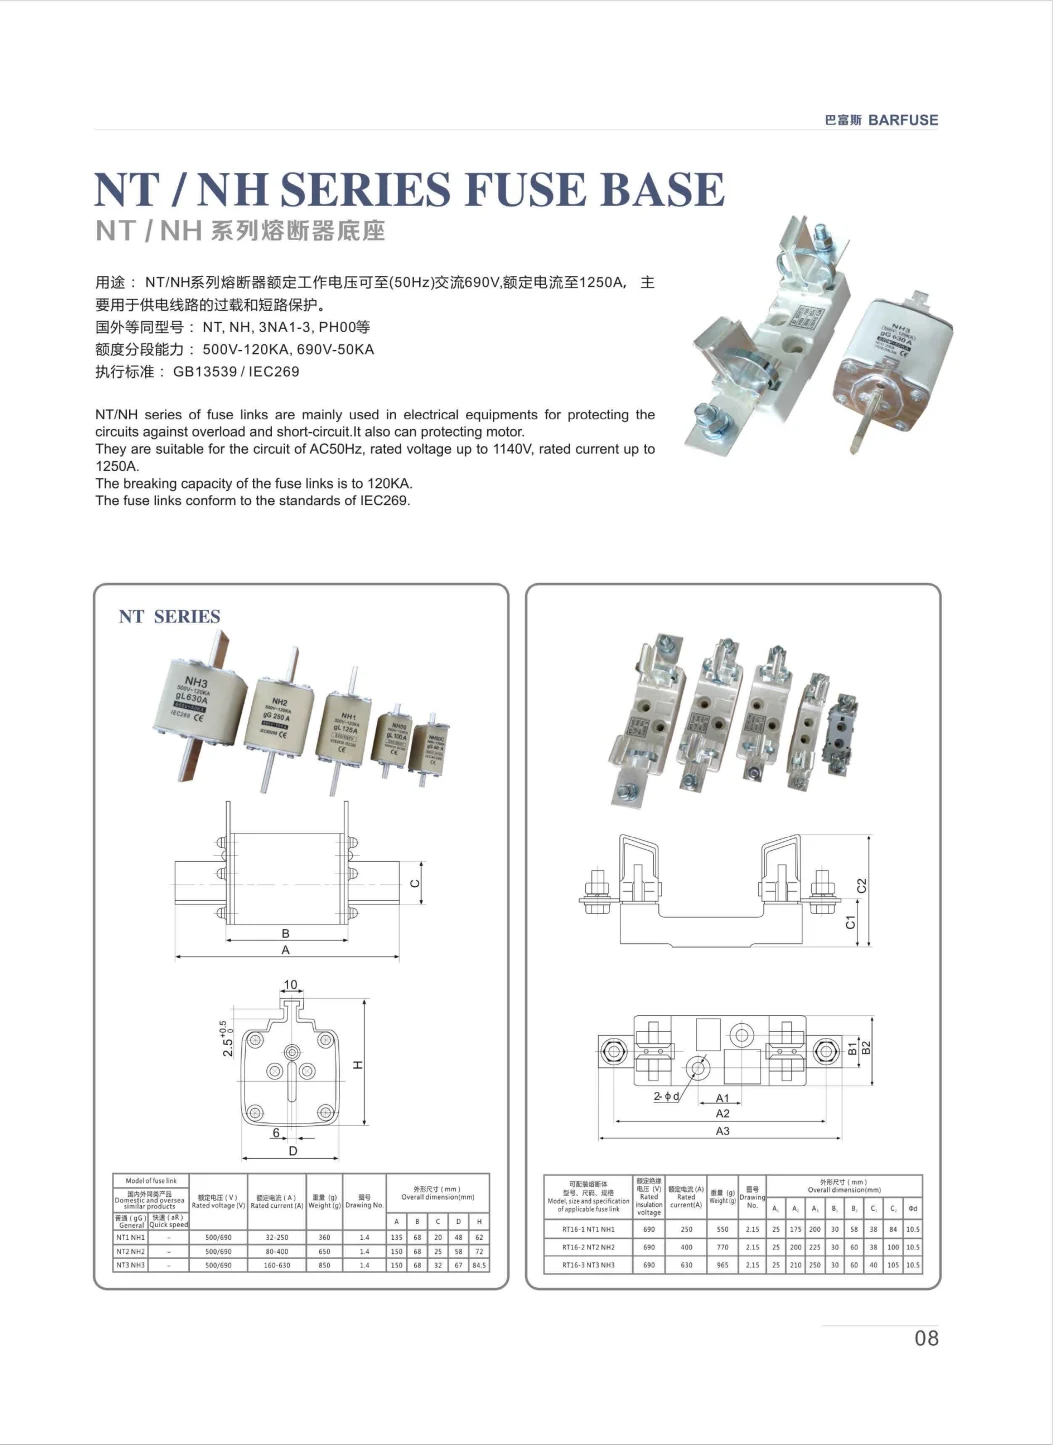 Low Voltage Nt/Nh Fuse Link with Fuse Holder